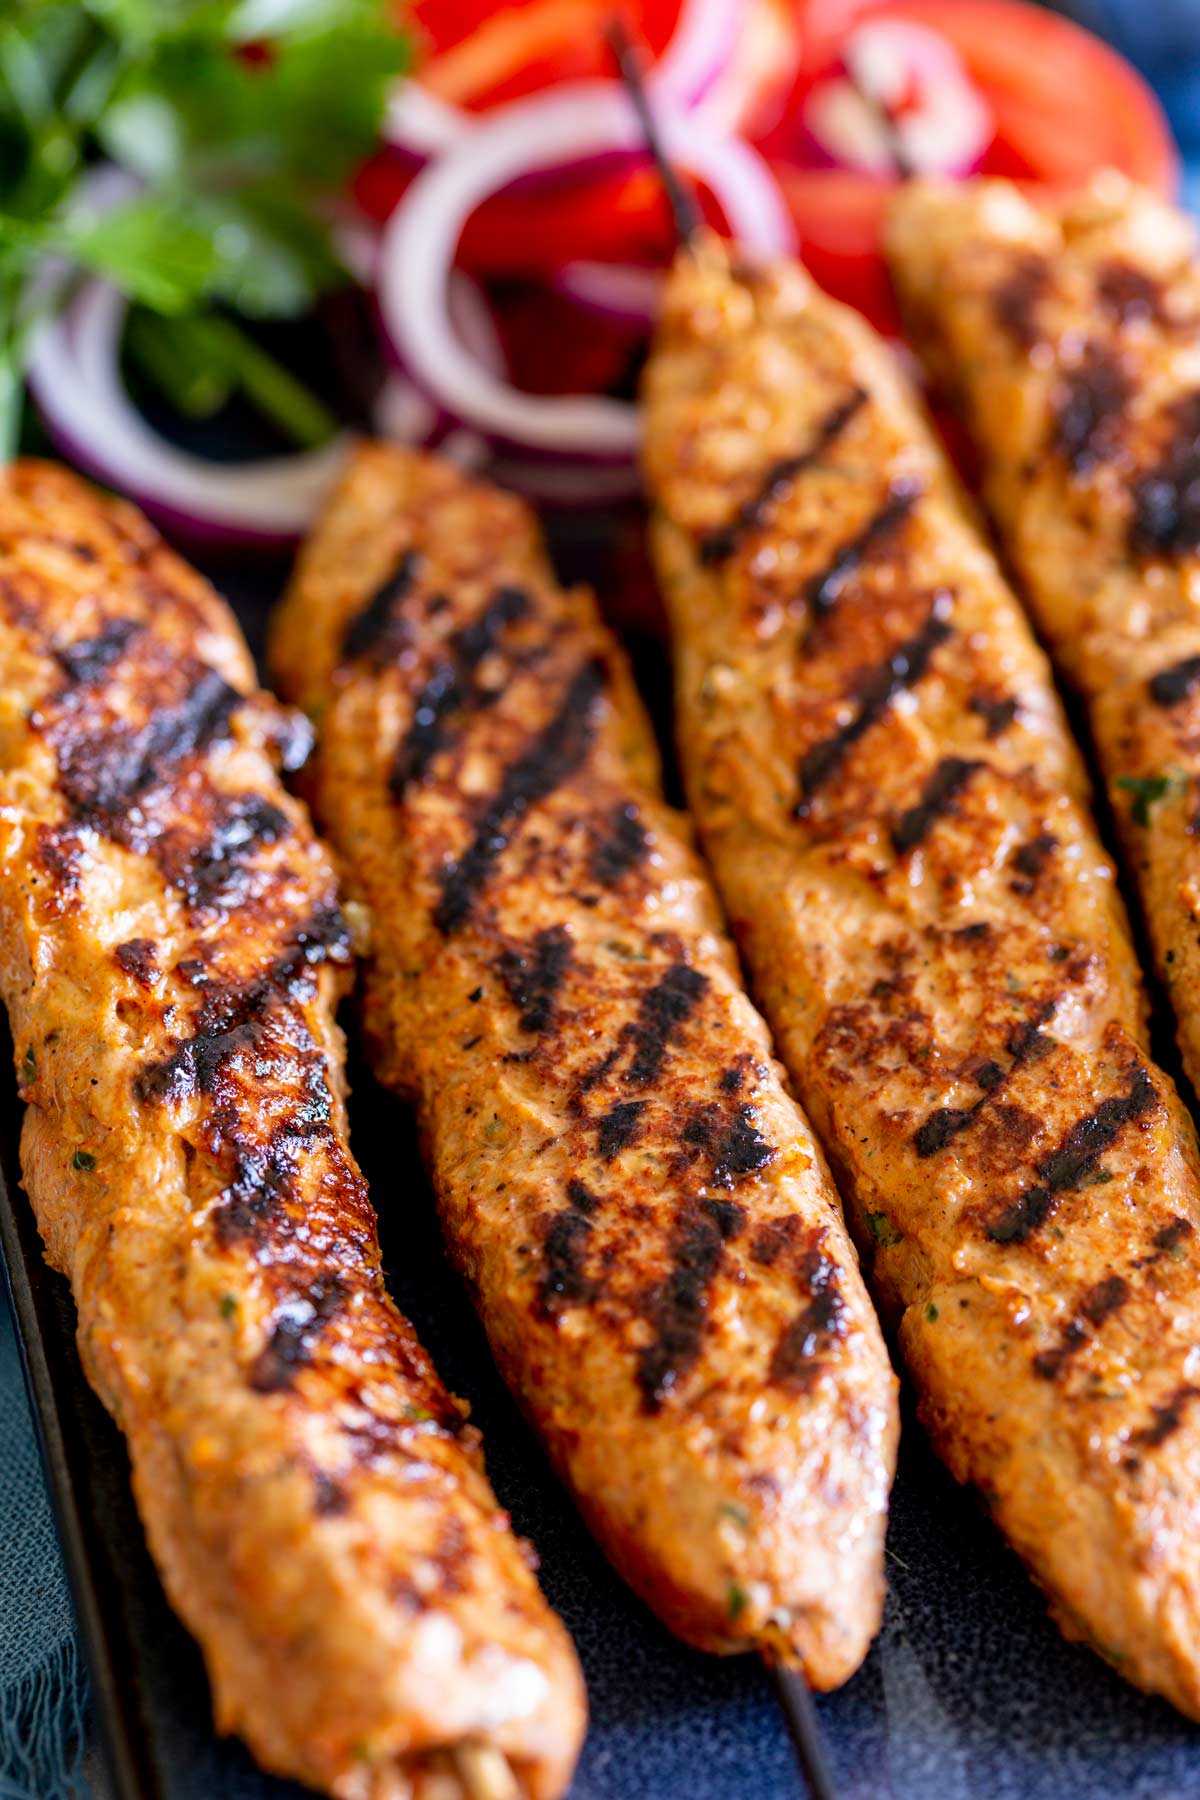 four grilled ground chicken kebabs on a plate